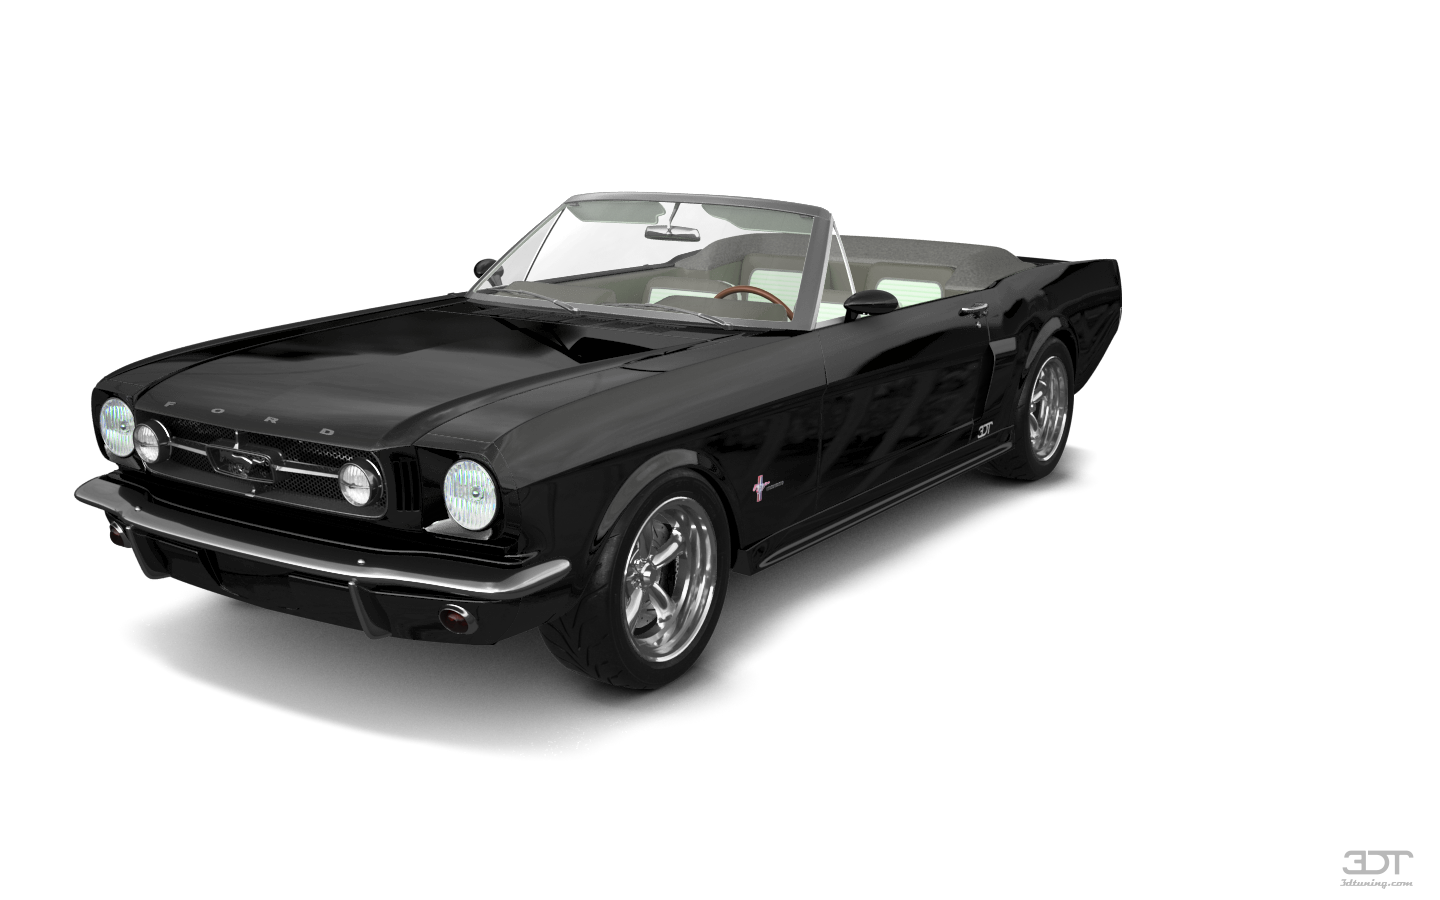 Ford Mustang Convertible 1964